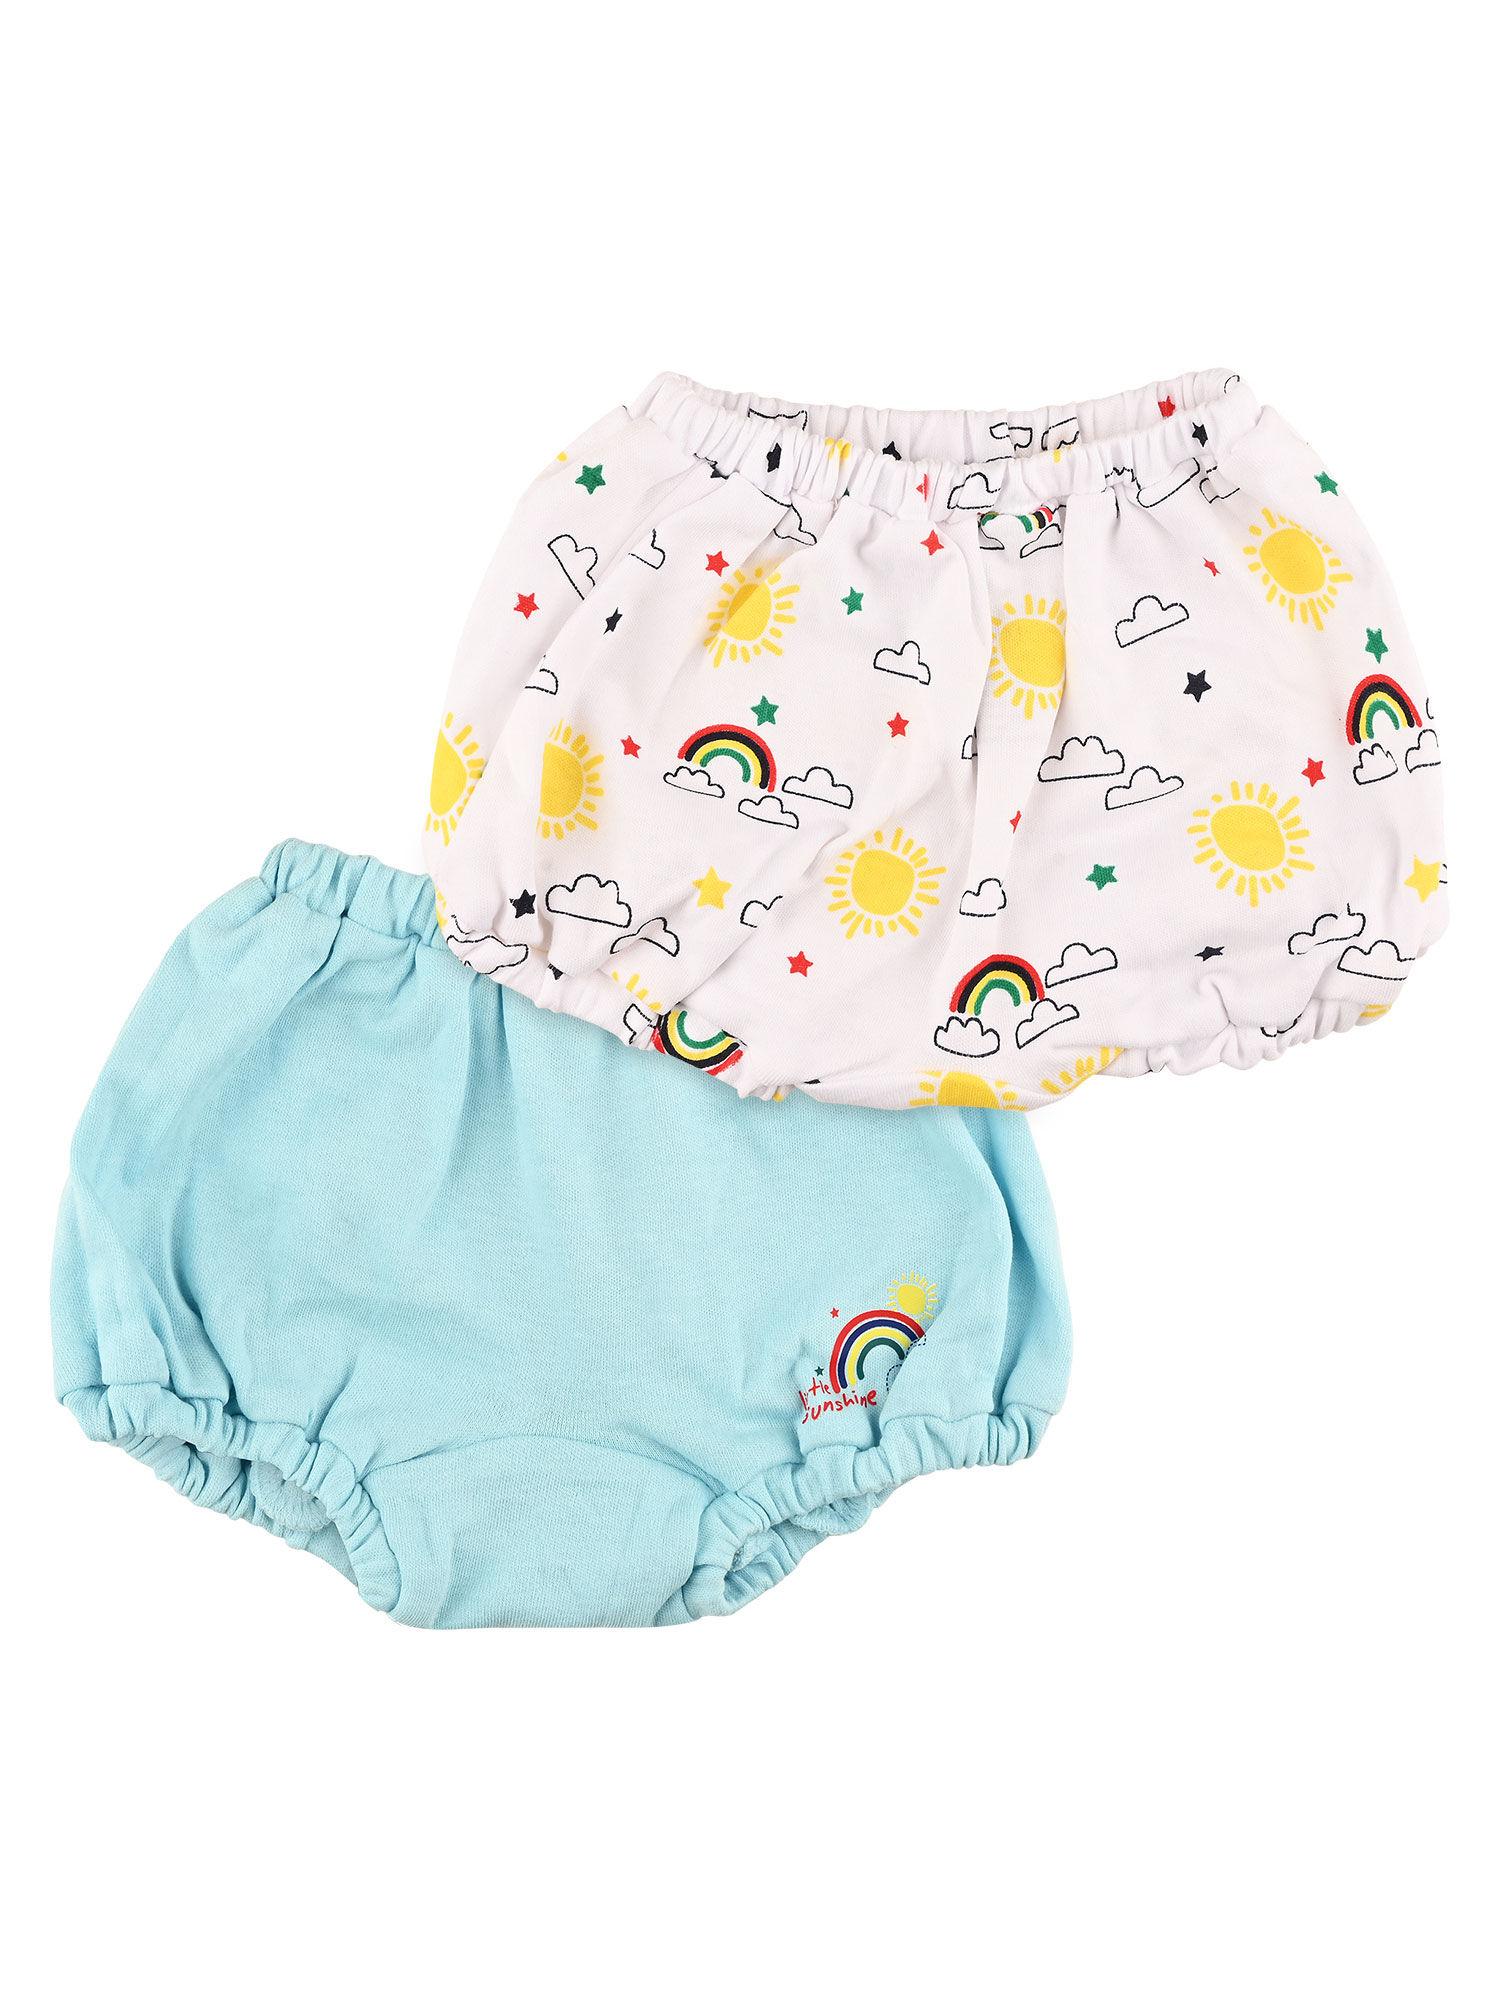 baby girls printed bloomer brief underwear blue and white (pack of 2)